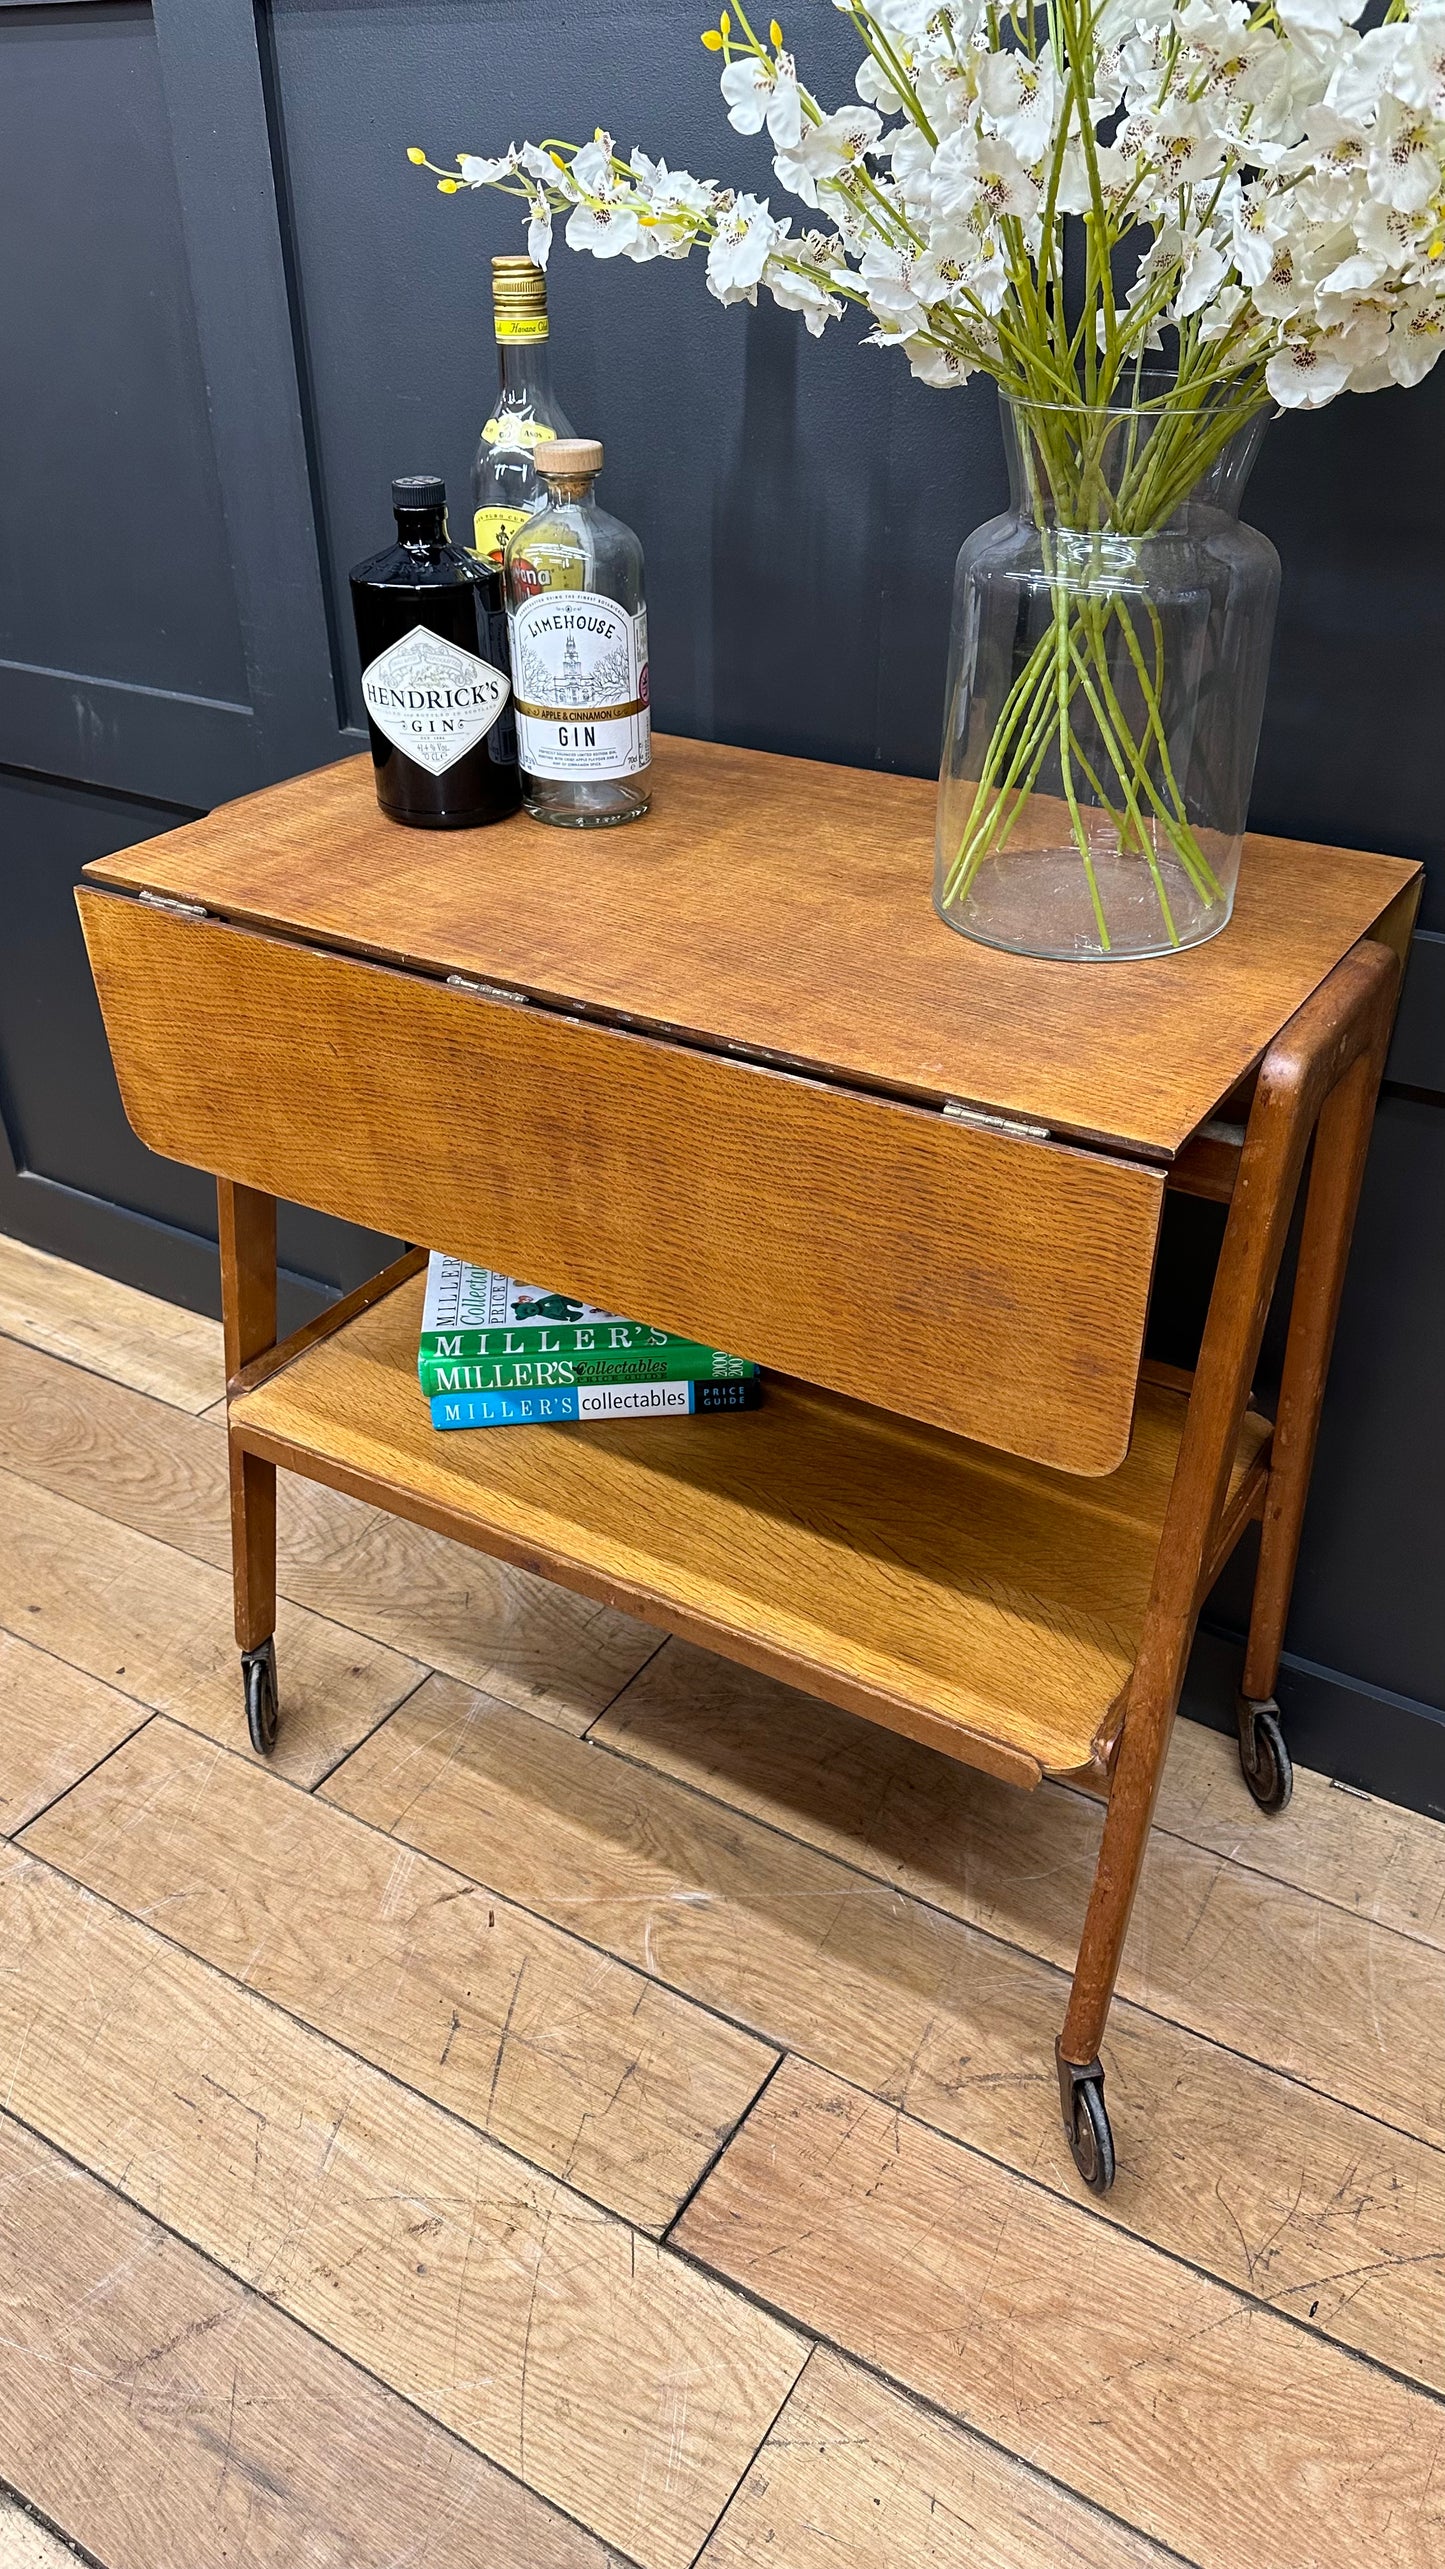 Retro Remploy Trolley - Mid Century Serving Cart - Tea Cake Cocktail Trolley